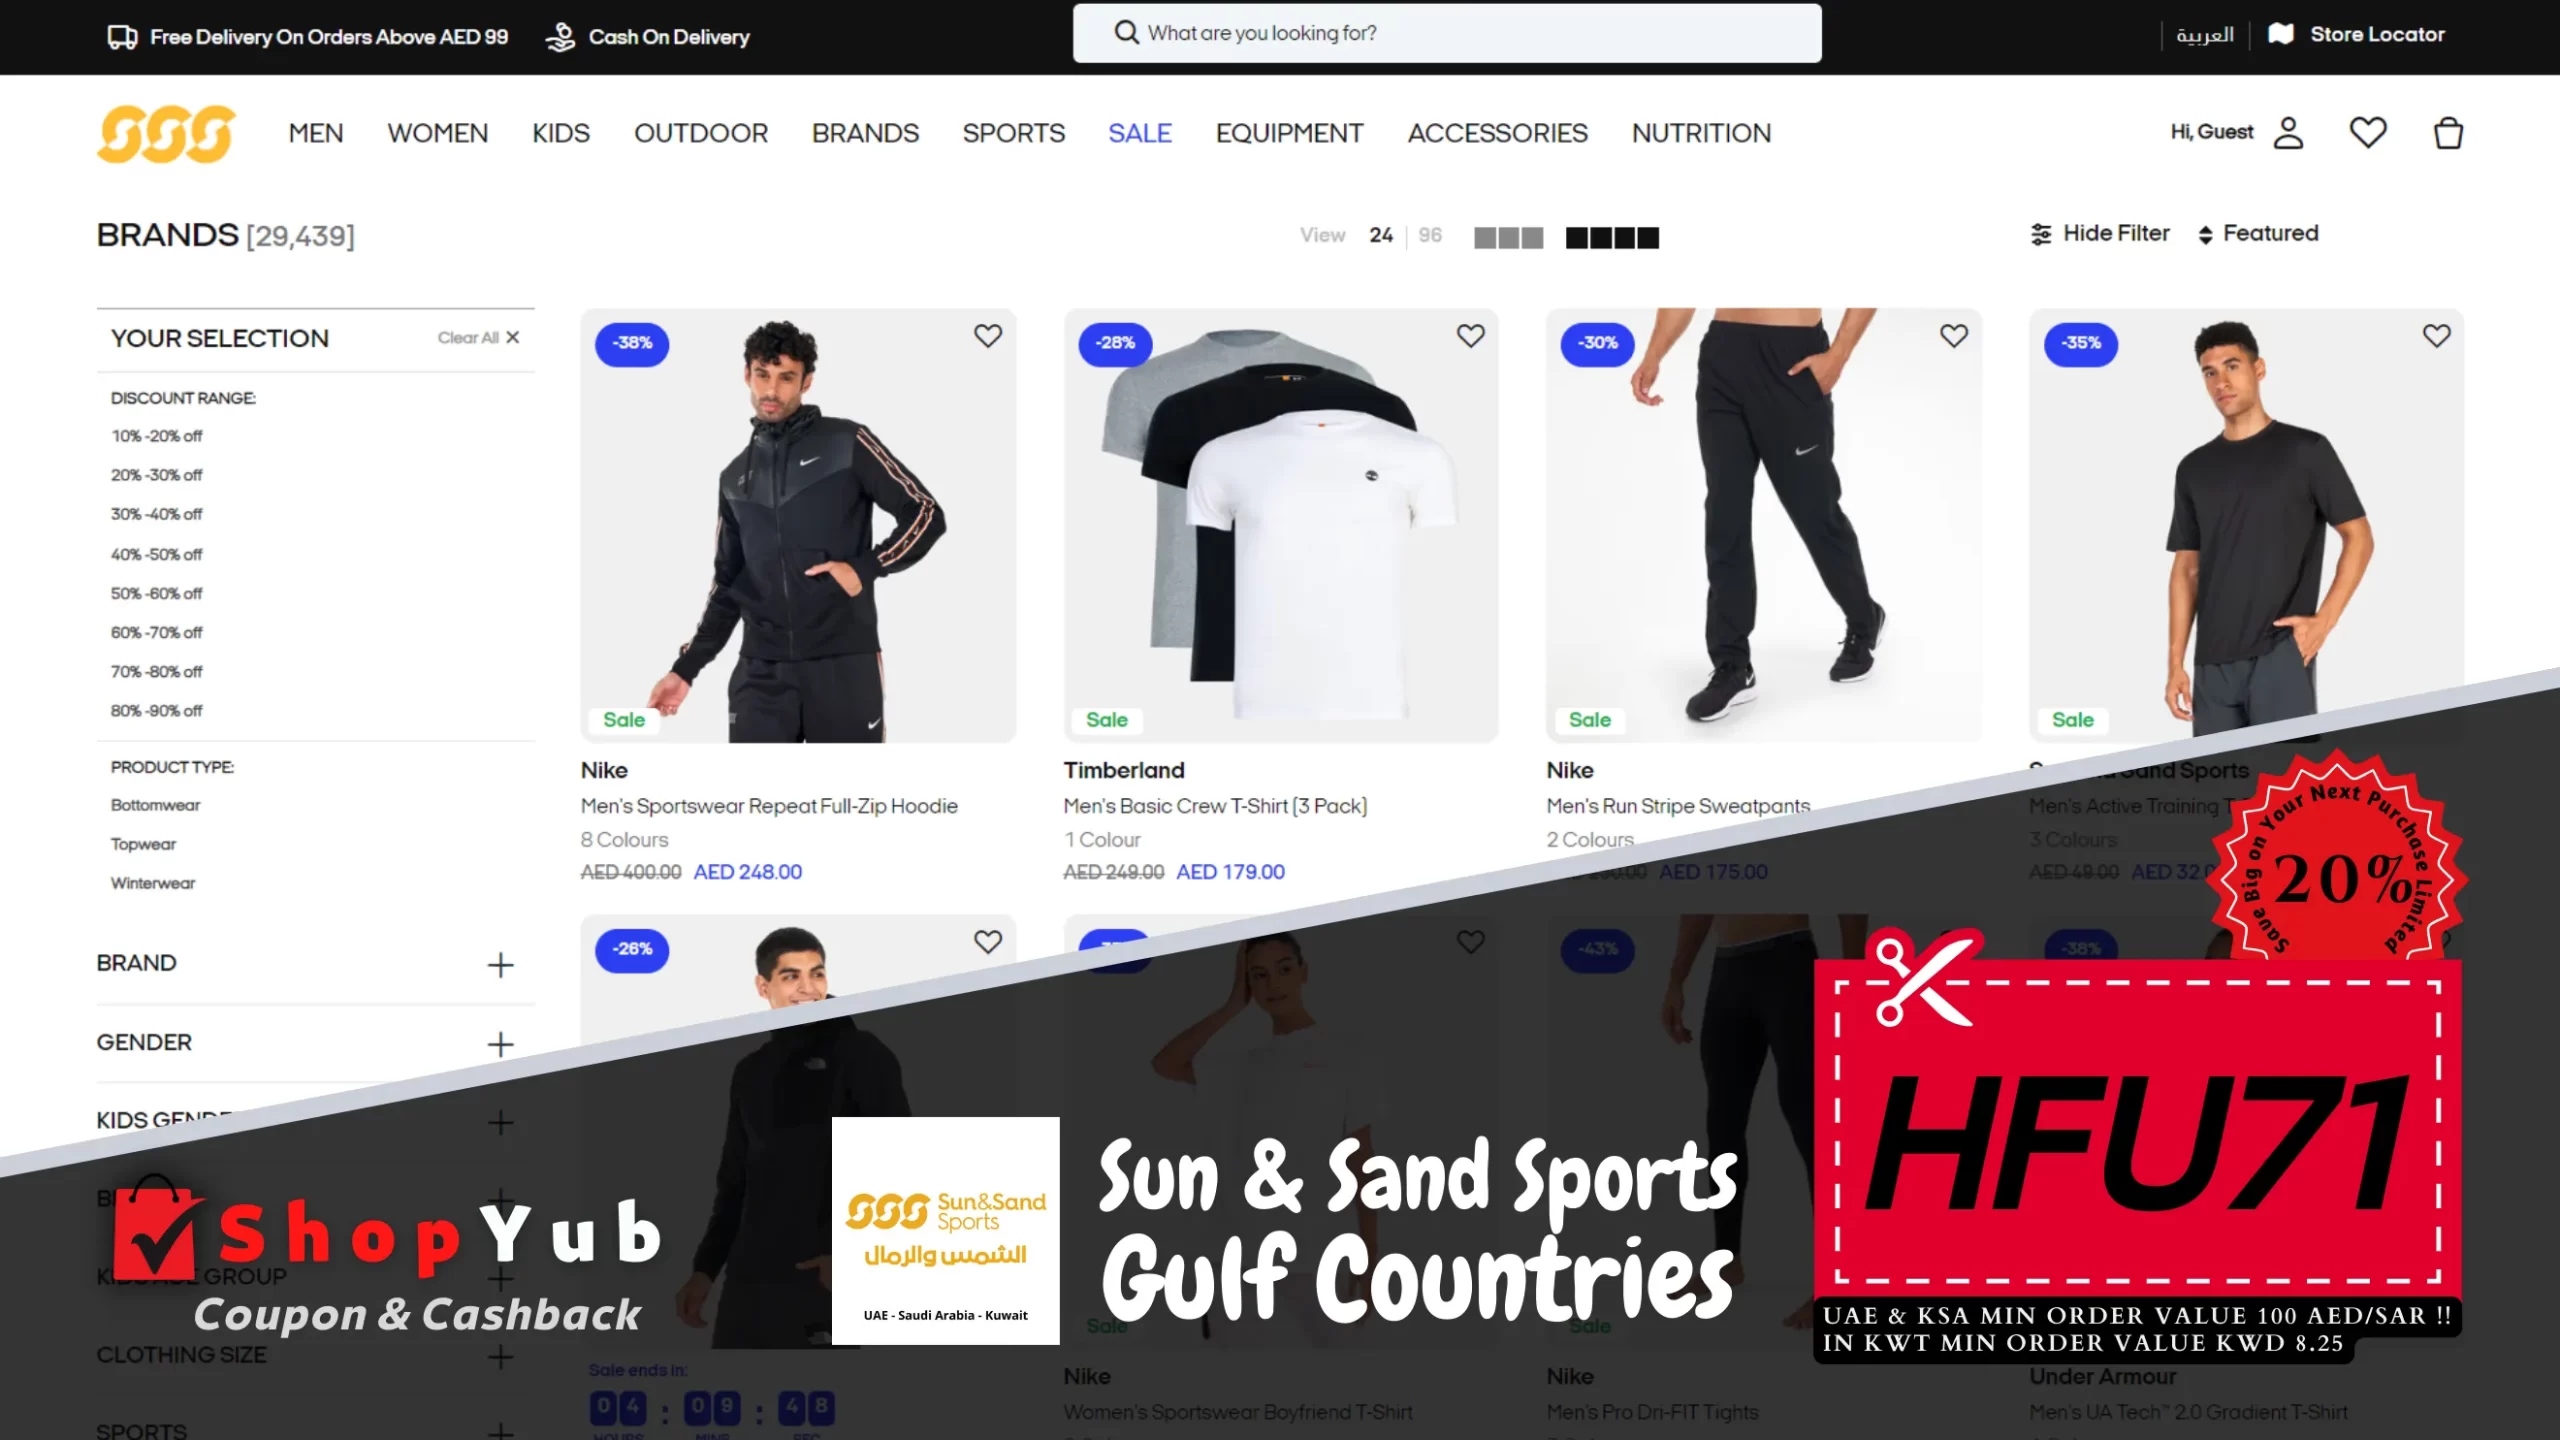 Use Sun & Sand Sports Coupon Code: HFU71 | Verified Sun & Sand Sports Coupons for UAE, KSA, KWT | 15% Off Sun & Sand Sports Discount Codes Fashion online | March 2024.